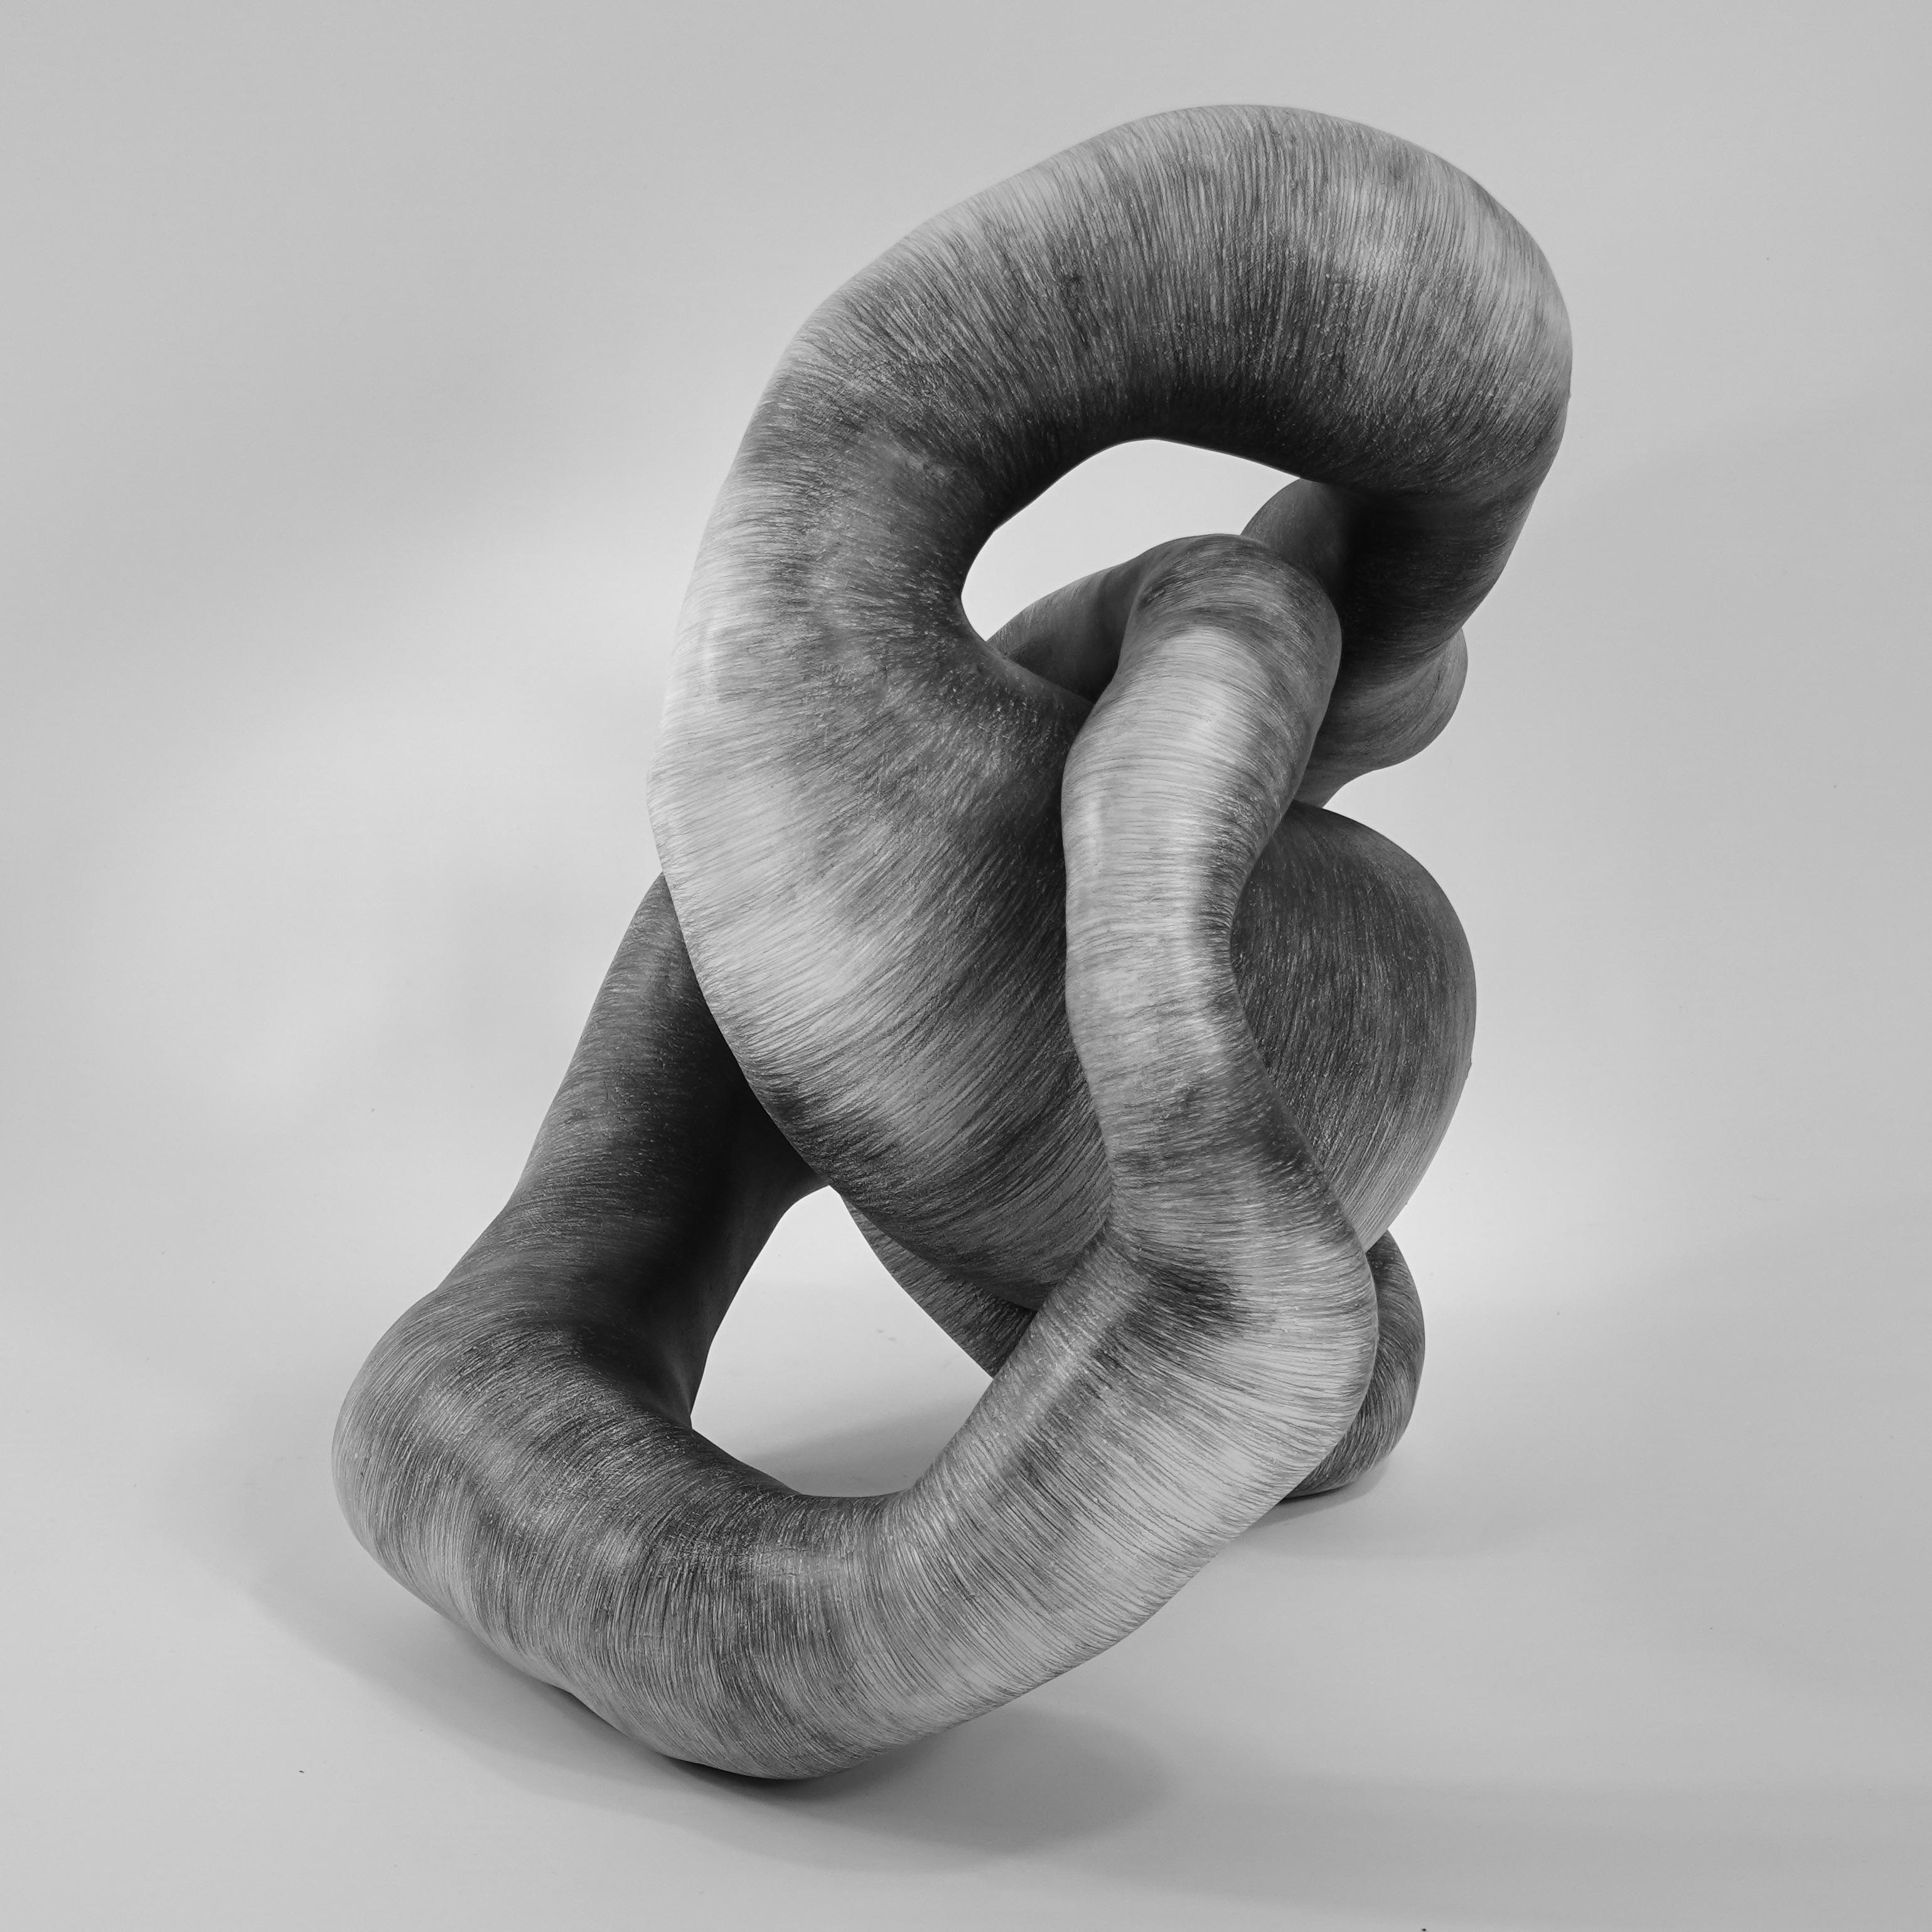 “My biomorphic abstractions range from intimate to immersive in scale, referencing our interconnectedness. 
 Building curvilinear ceramic sculpture and then drawing intertwined graphite lines on the surface, creates energy that seems to emanate from